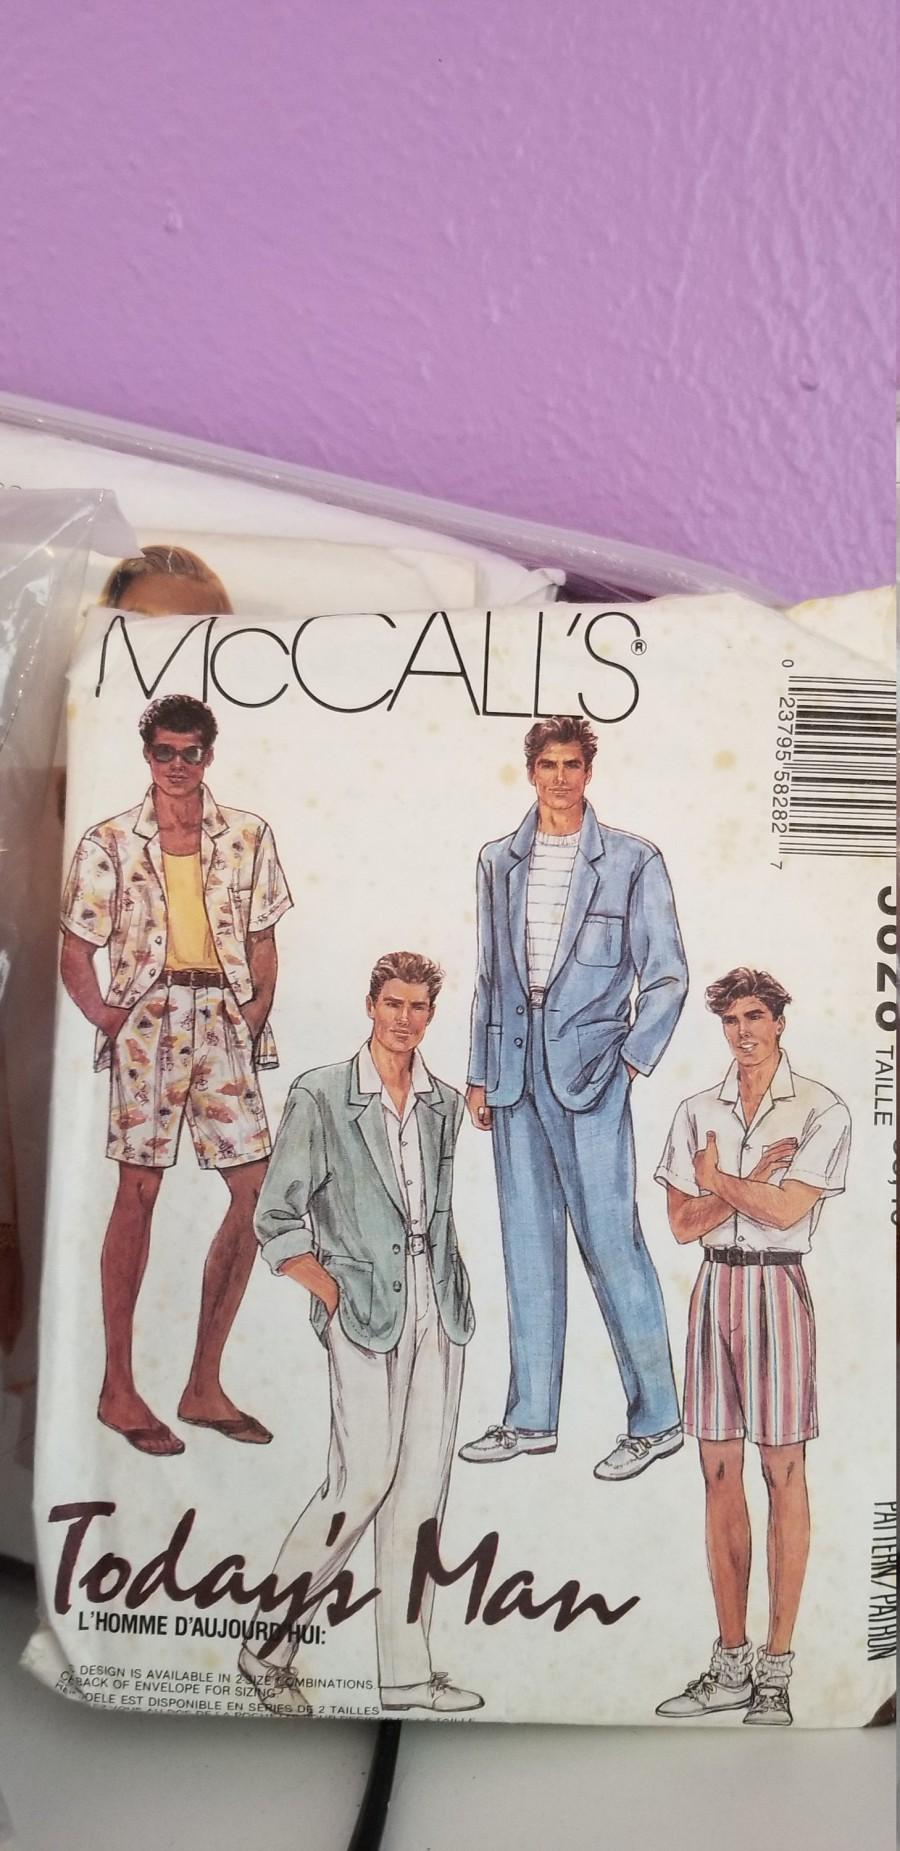 Hochzeit - McCalls mens unlined jacket shirt and pants or shorts sizes 38 to 40 some precut pieces